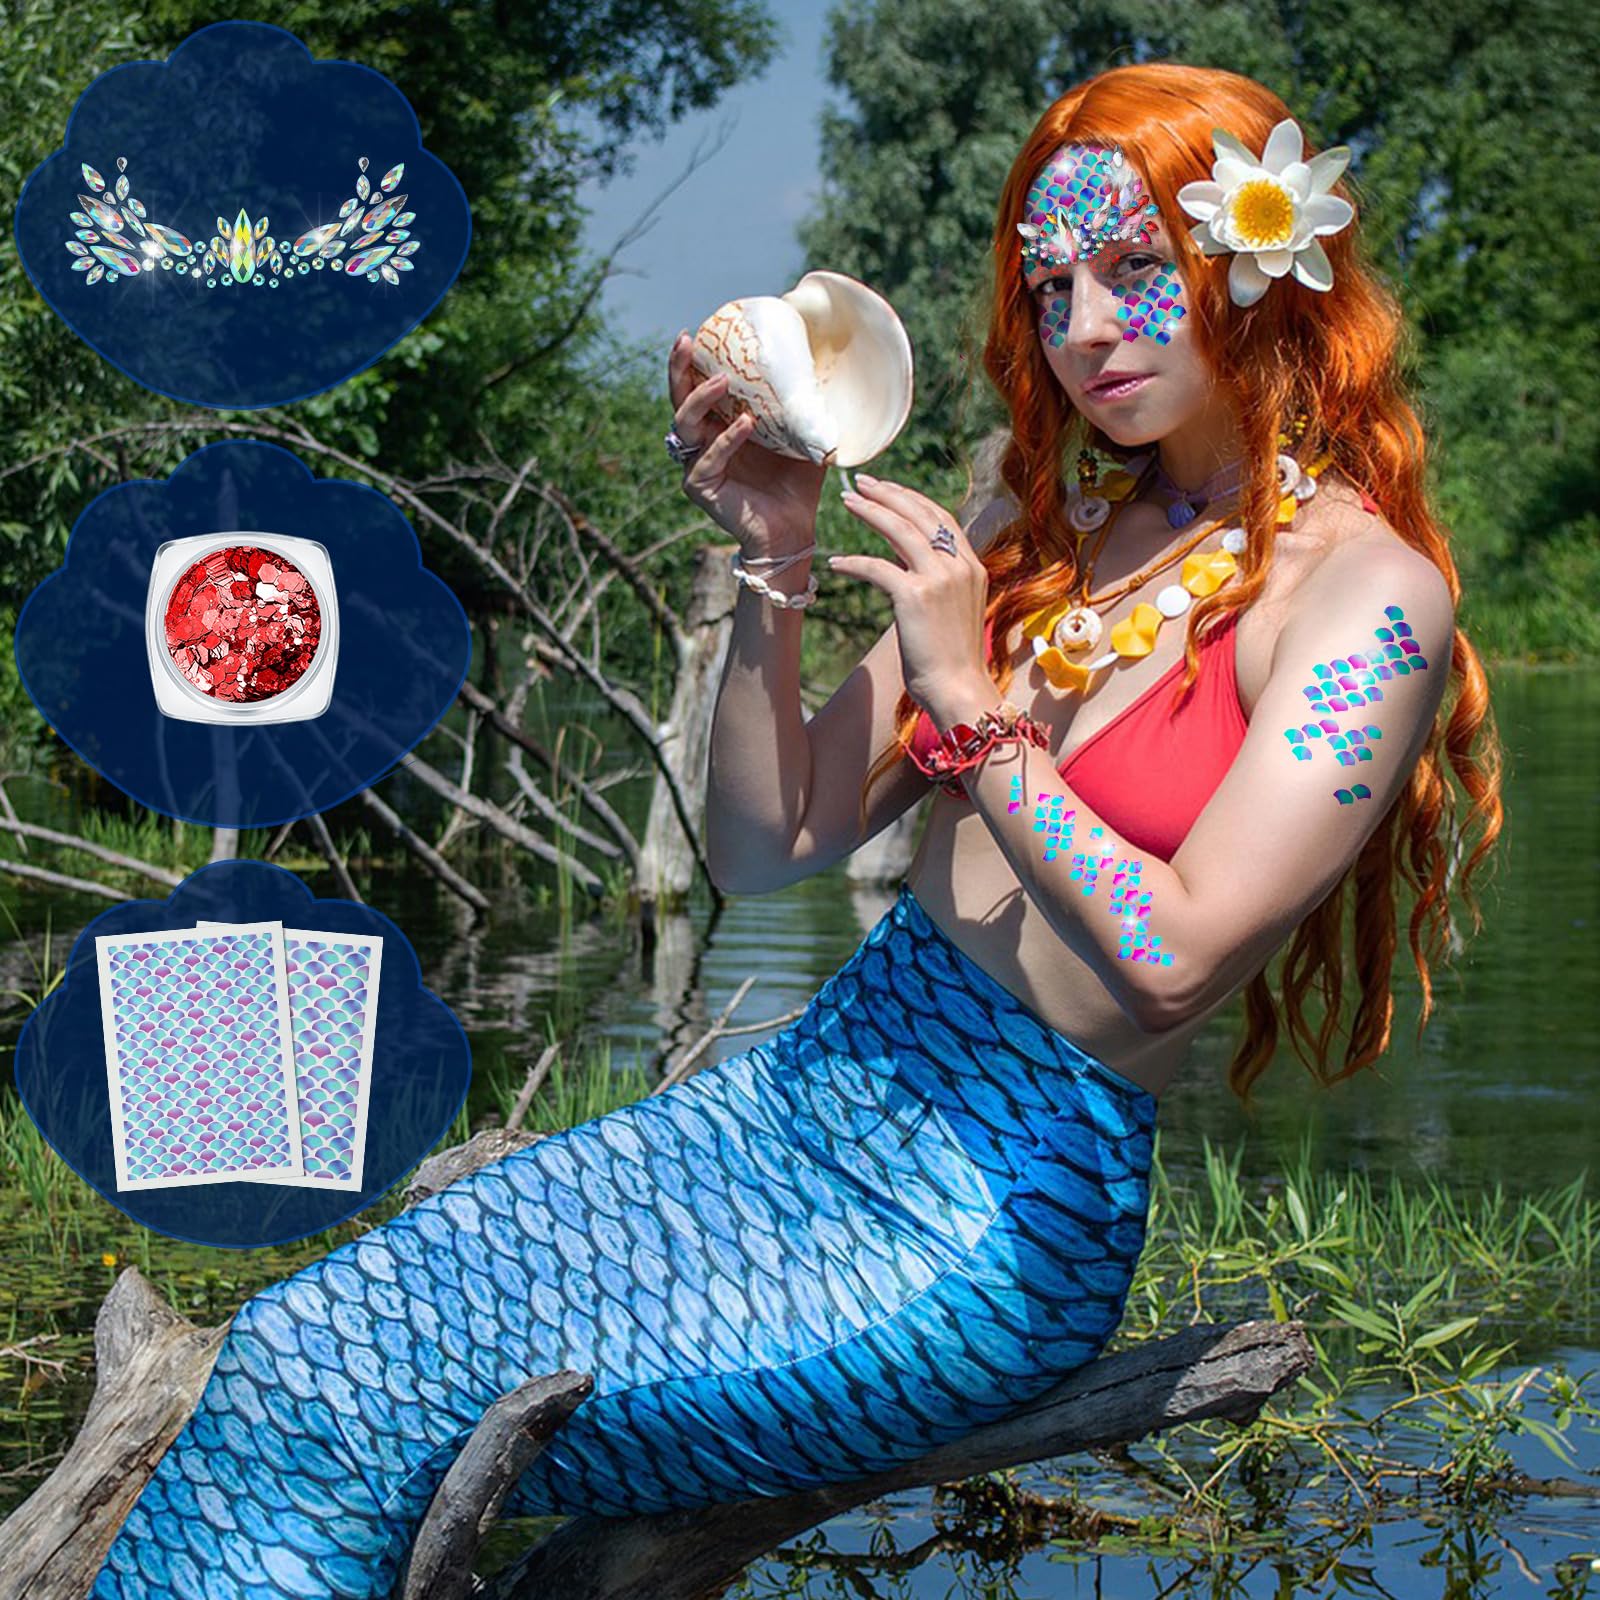 Jutom 21 Pcs Halloween Mermaid Costume for Women Make up Kit 4 Sheets Mermaid Scale Temporary Tattoos Stickers 9 Sets Body Face Jewels 8 Bottles Holographic Face Gems Glitter for Festival Rave Party